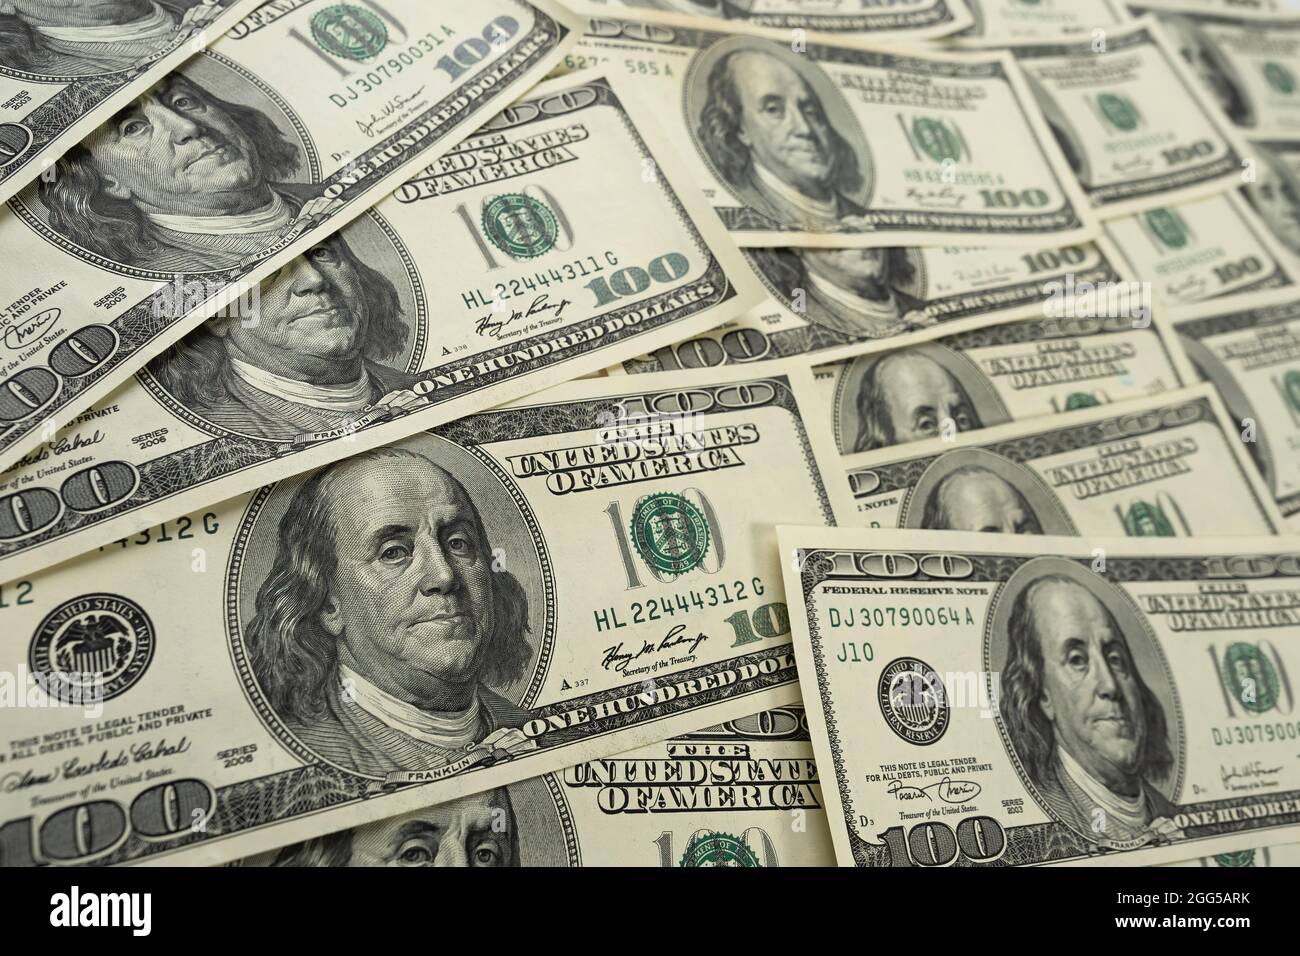 A money pile of one hundred US banknotes with president Franklin portrait. Cash of hundred dollar bills, paper currency background. Stock Photo